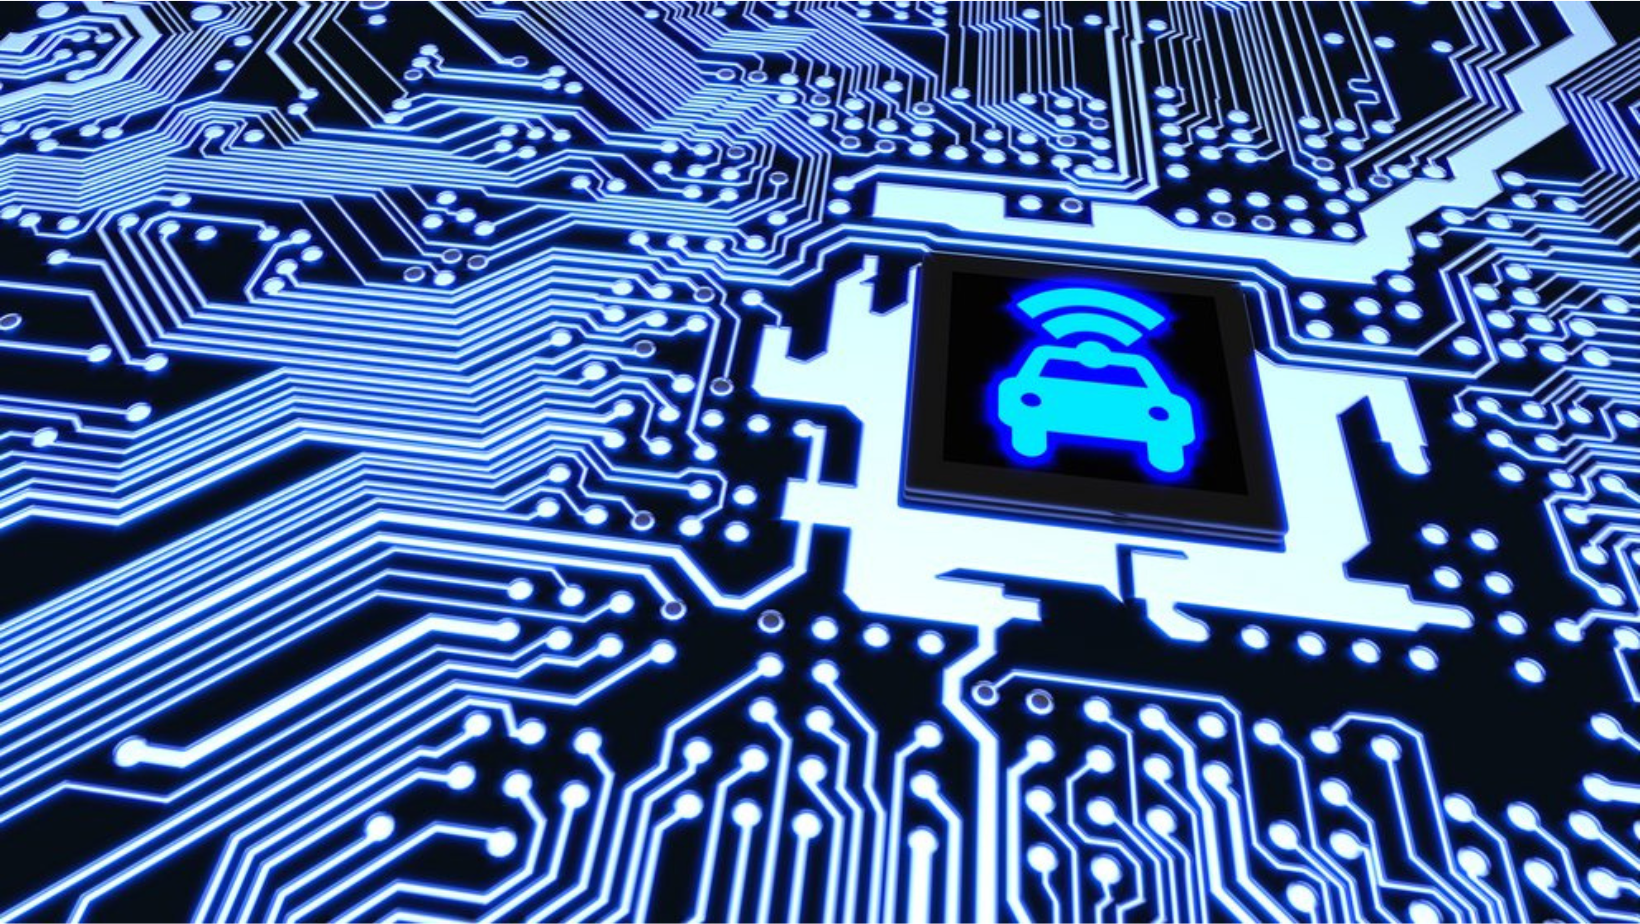 A blue computer circuit board has a glowing car with a Wi-Fi icon, indicating a smart vehicle.